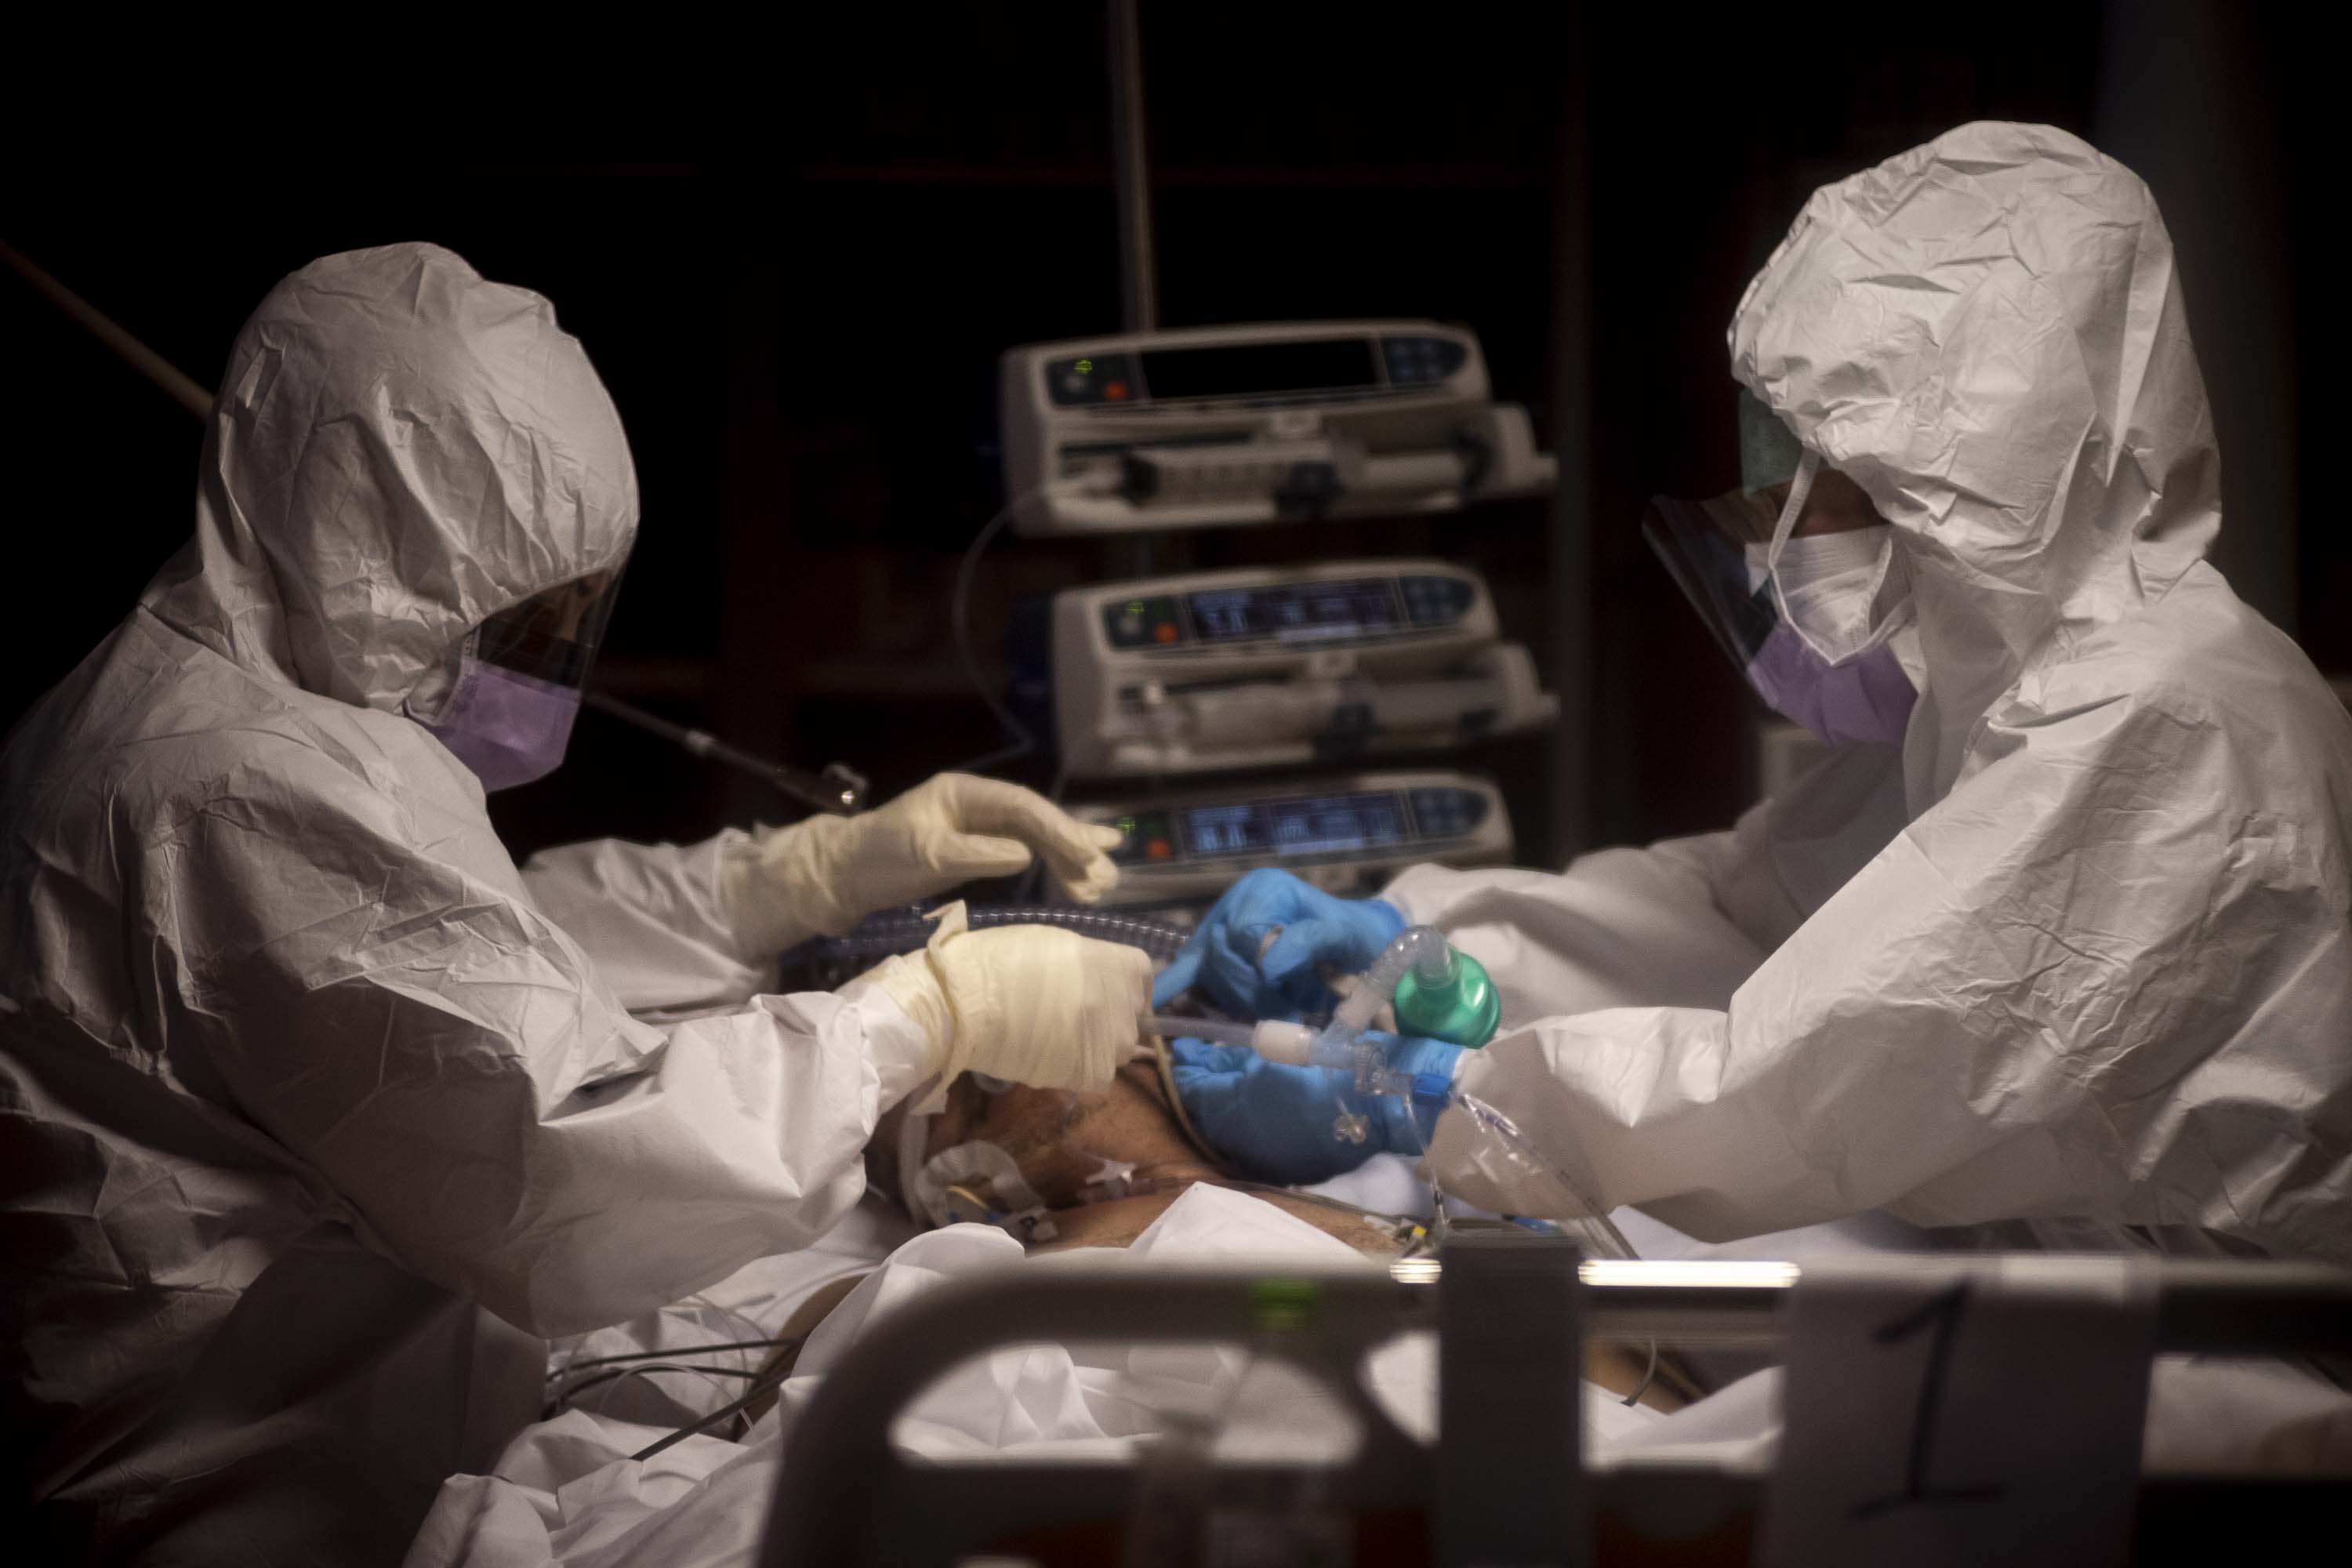 Doctors treat a coronavirus patient in an intensive care unit at a hospital in Rome, Italy, on March 26. ROME, ITALY - MARCH 26: 